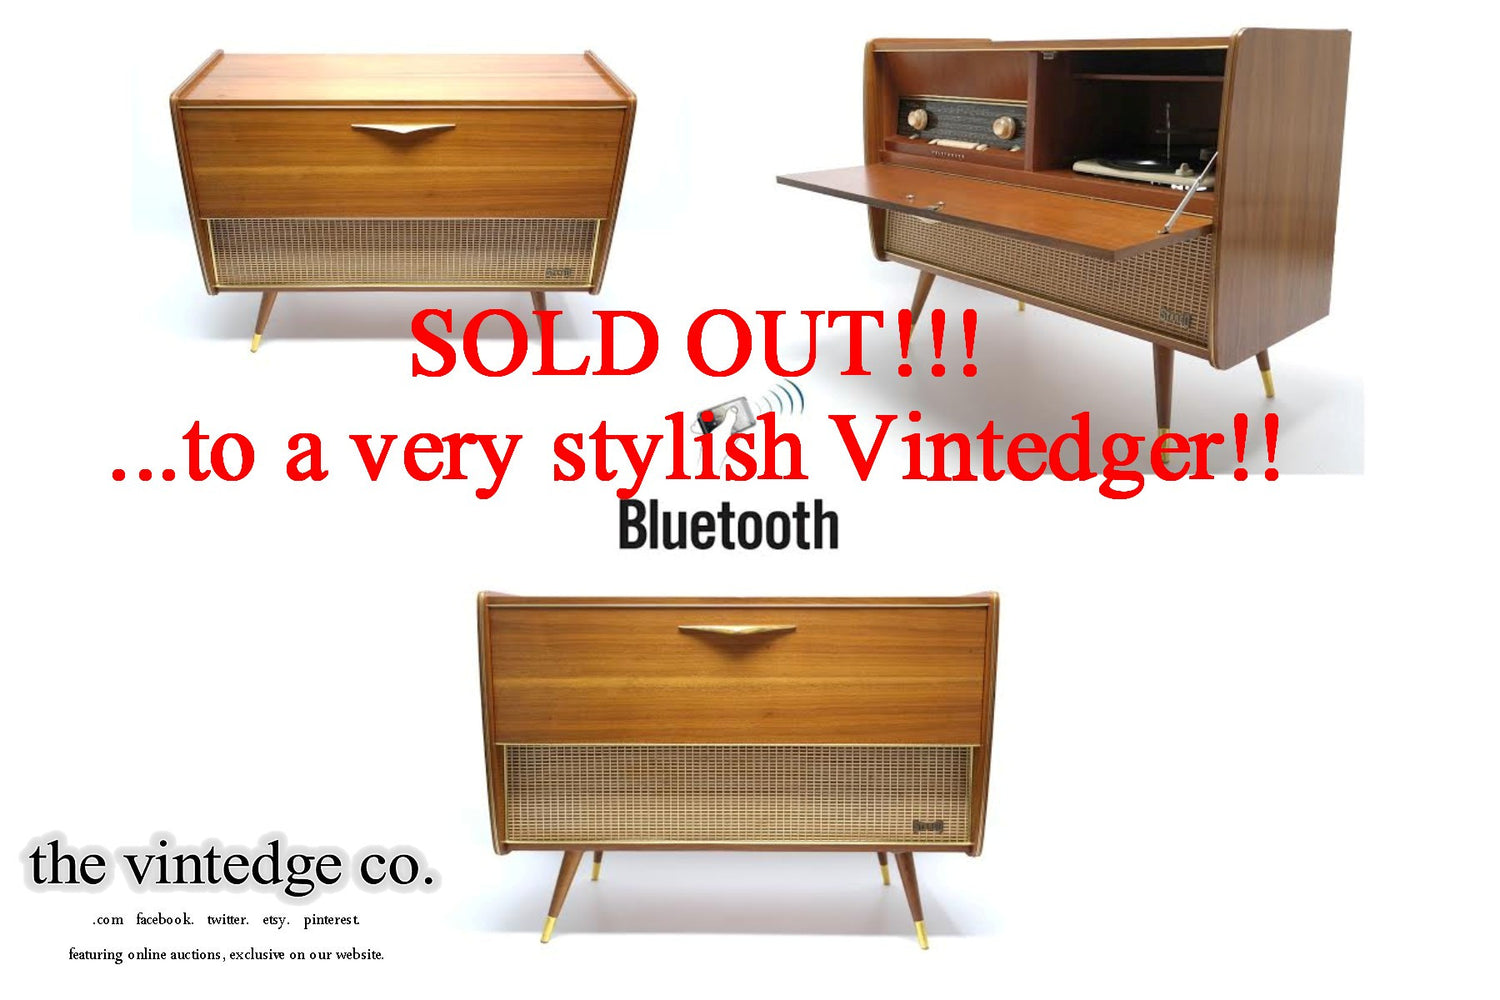 SOLD - MCM STEREO - 60's - Mid Century Telefunkin Record Player - Bluetooth iPod iPhone Android Input AM/FM Tuner The Vintedge Co.